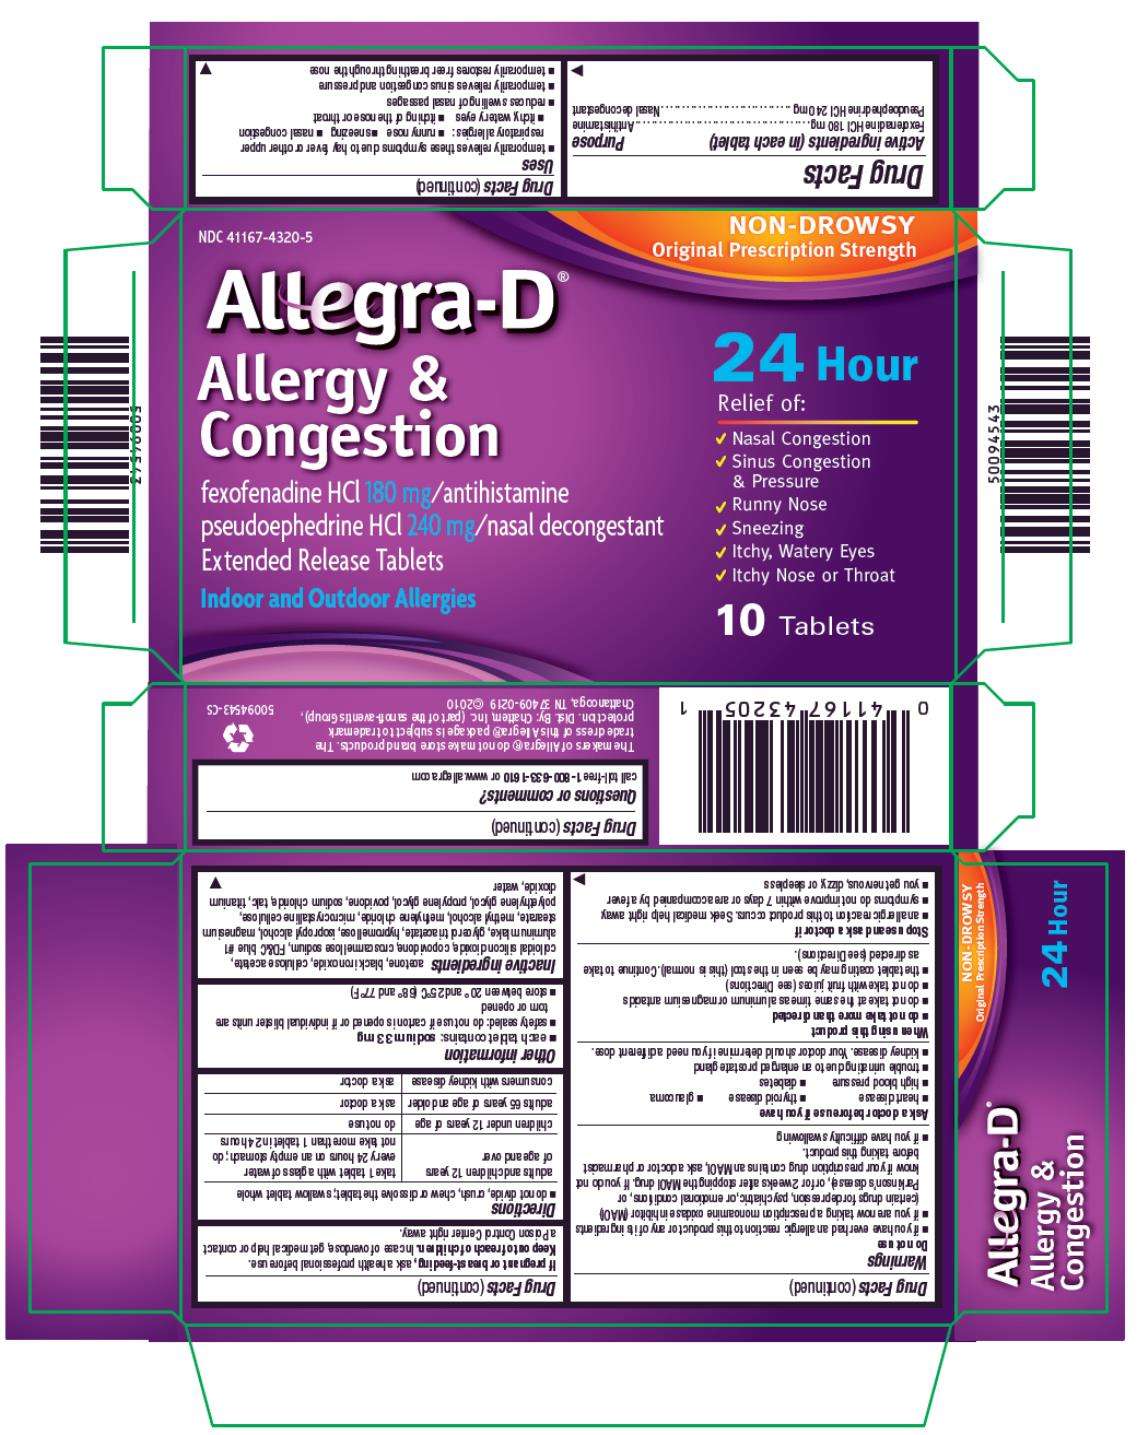 Allegra-D 24 Hour Allergy and Congestion